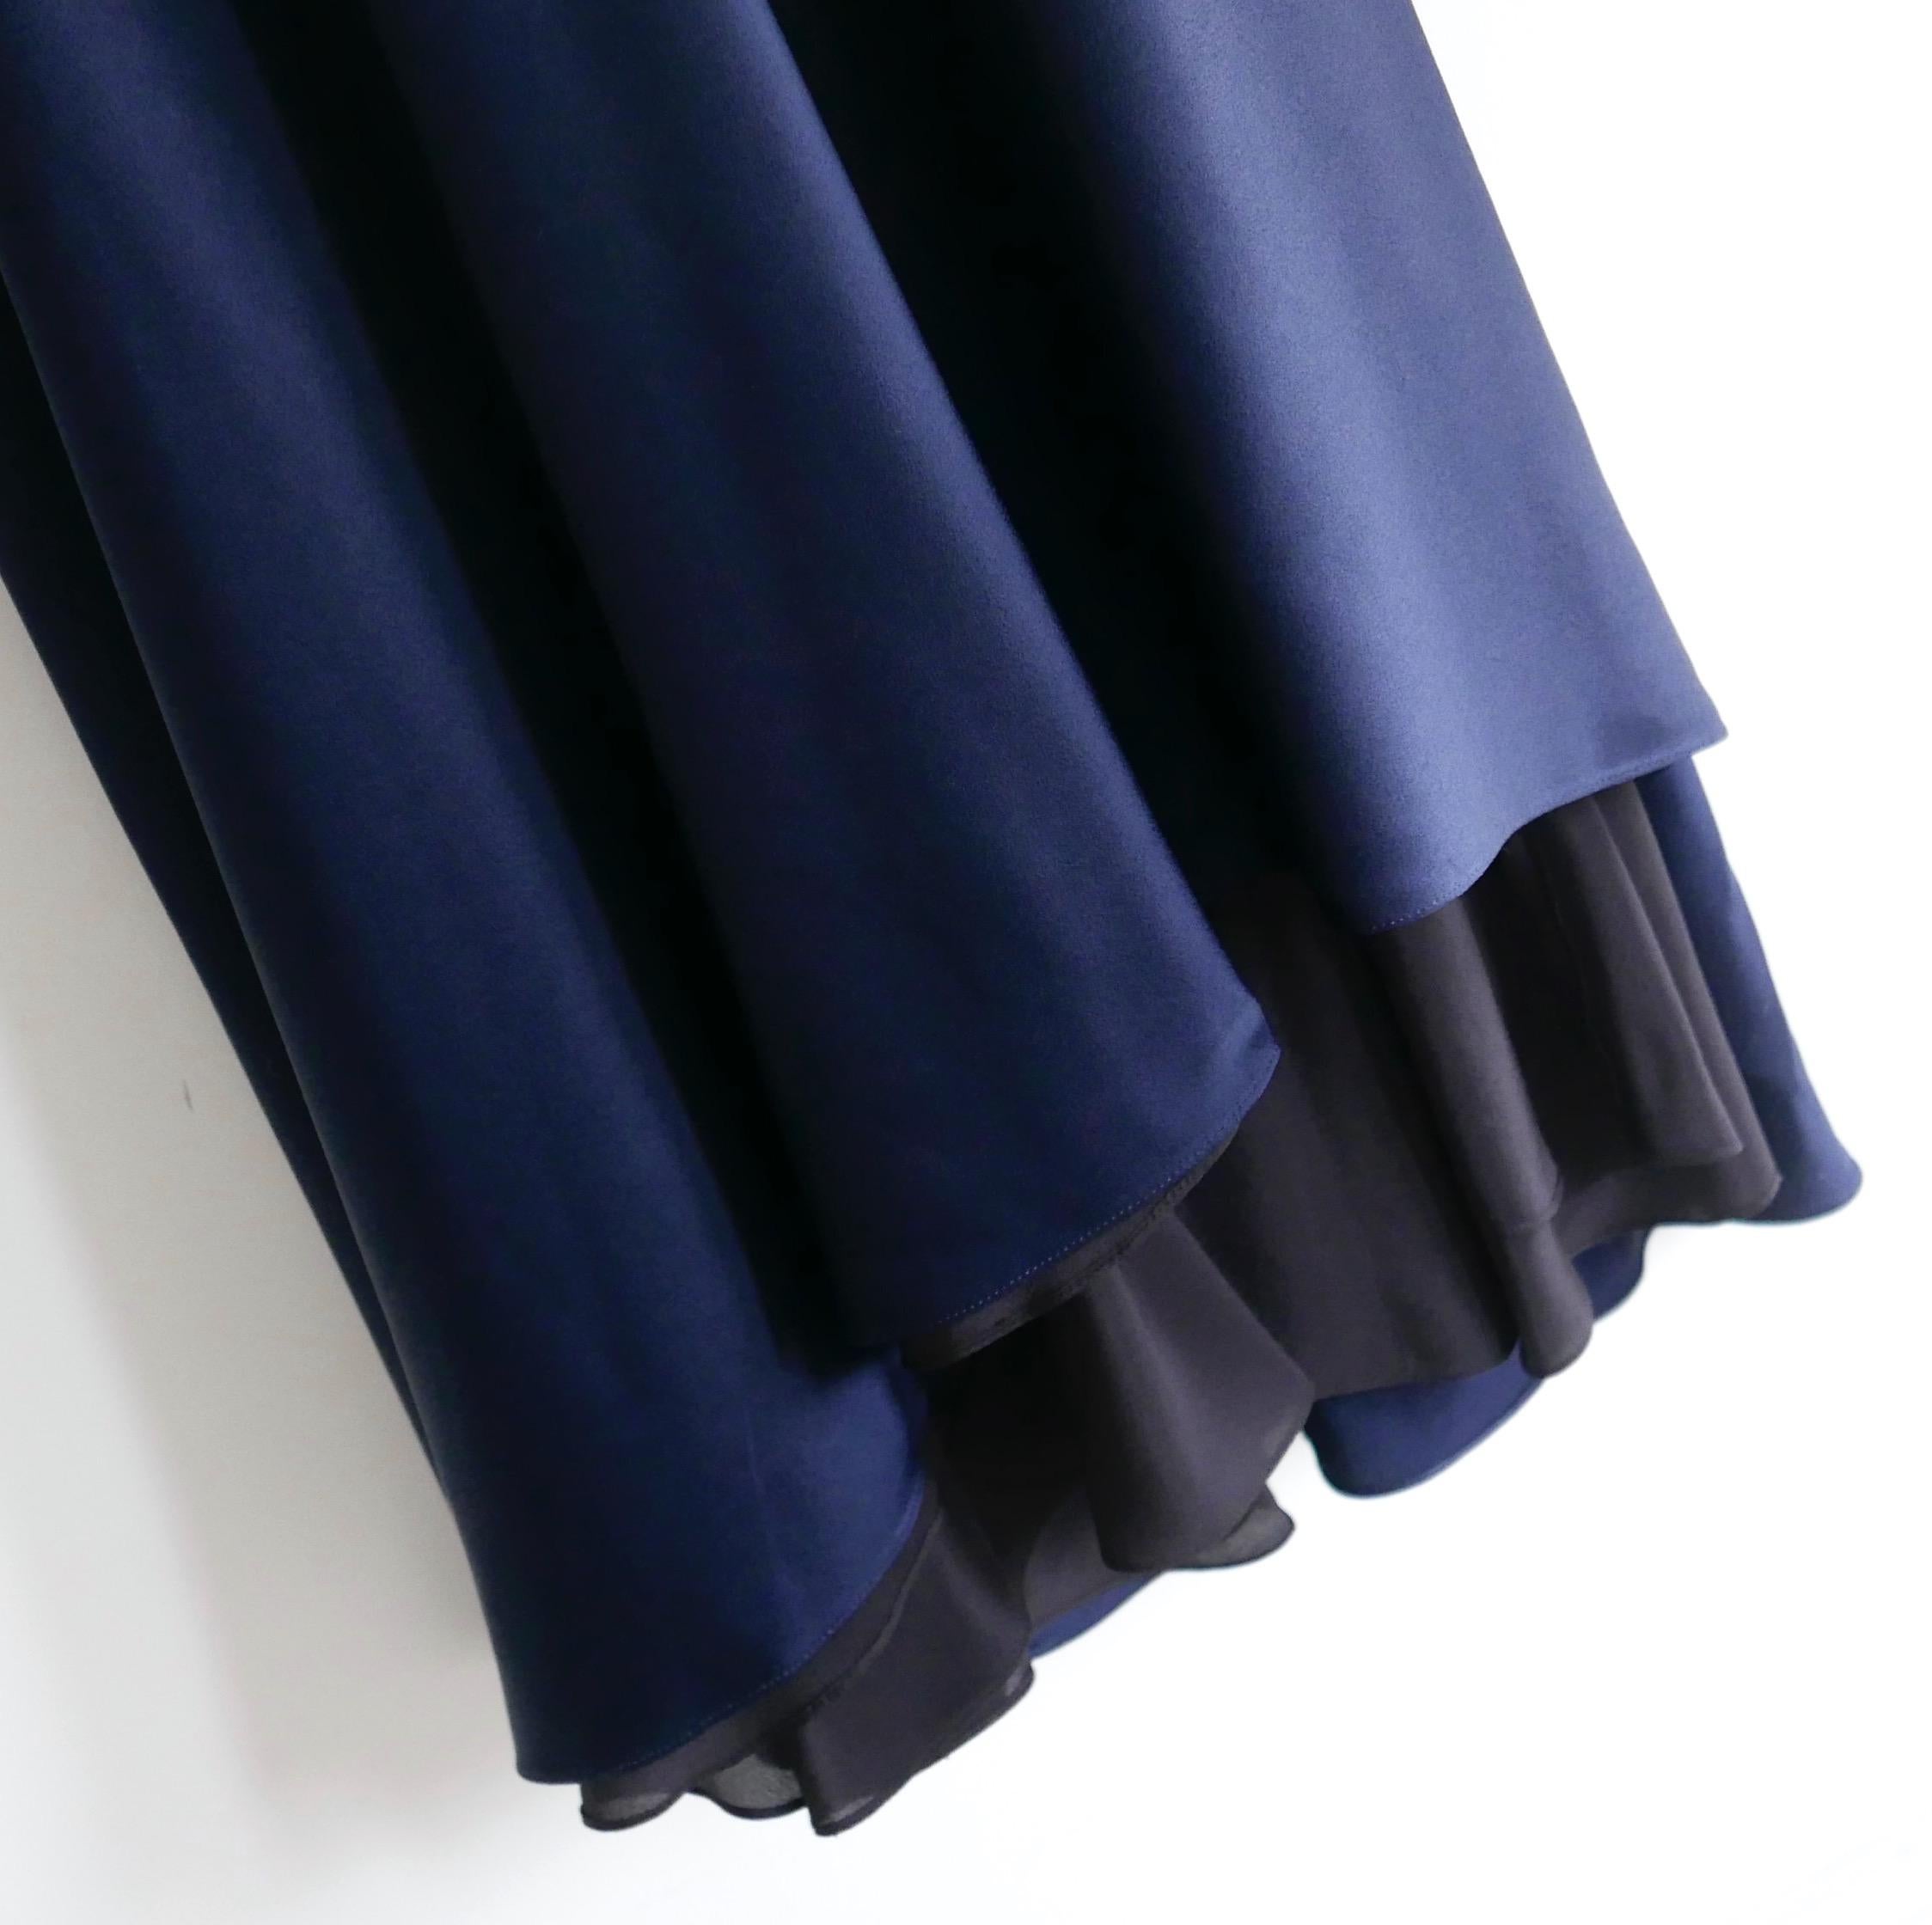 Dramatic, modern minimalist Haider Ackerman navy satin gown. Bought for £1750 and new with tag. Made from shiny indigo acetate mix satin with a black silk lining. Superbly tailored with a sweeping bias cut graduating into a floor sweeping,